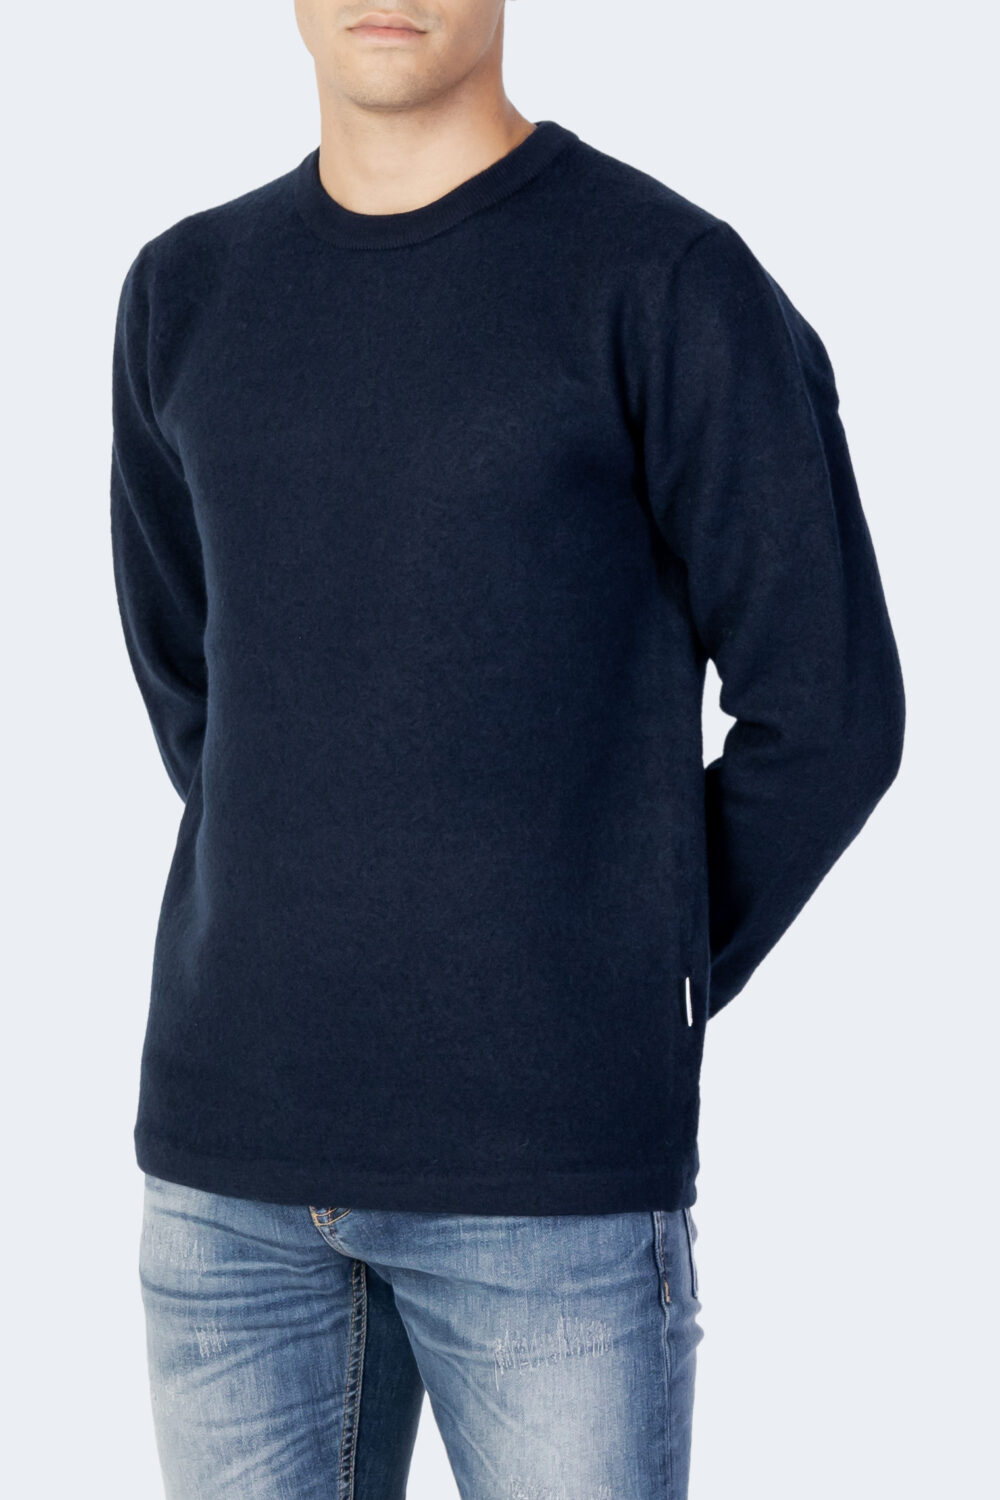 Maglia Selected slhbelo ls knit crew neck w Blue scuro - Foto 1